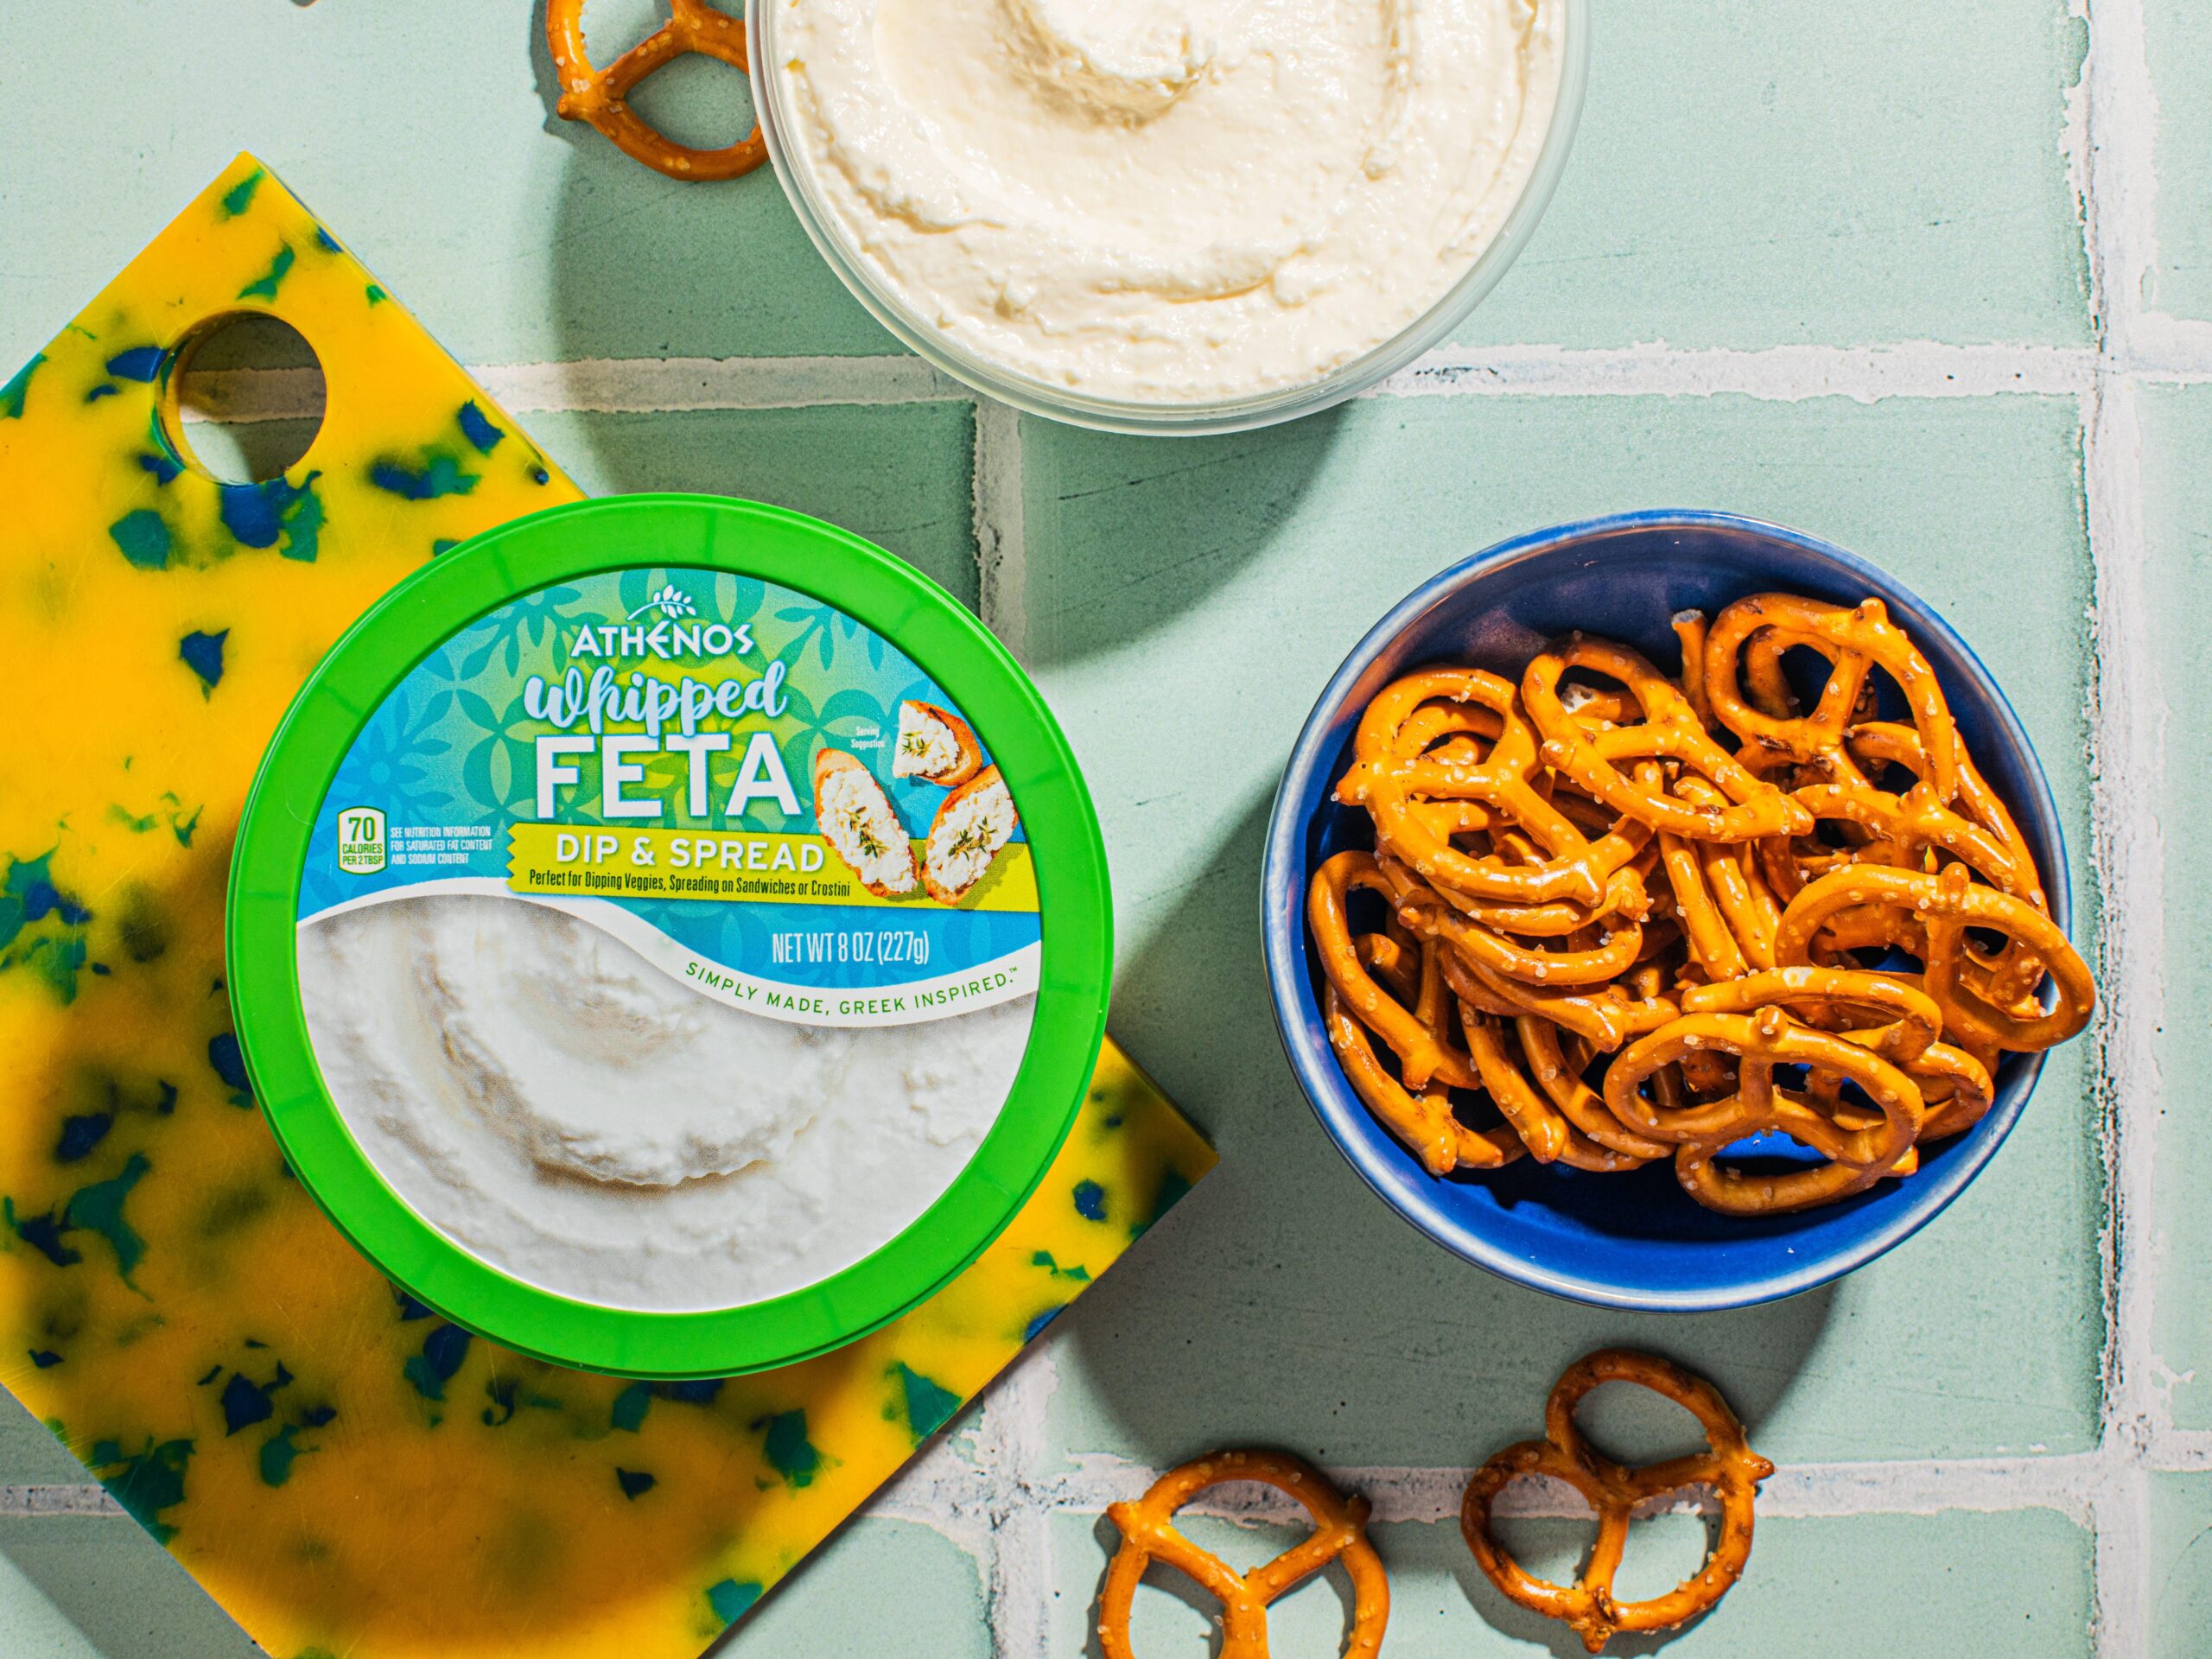 Whipped Feta Dip & Spread with pretzels